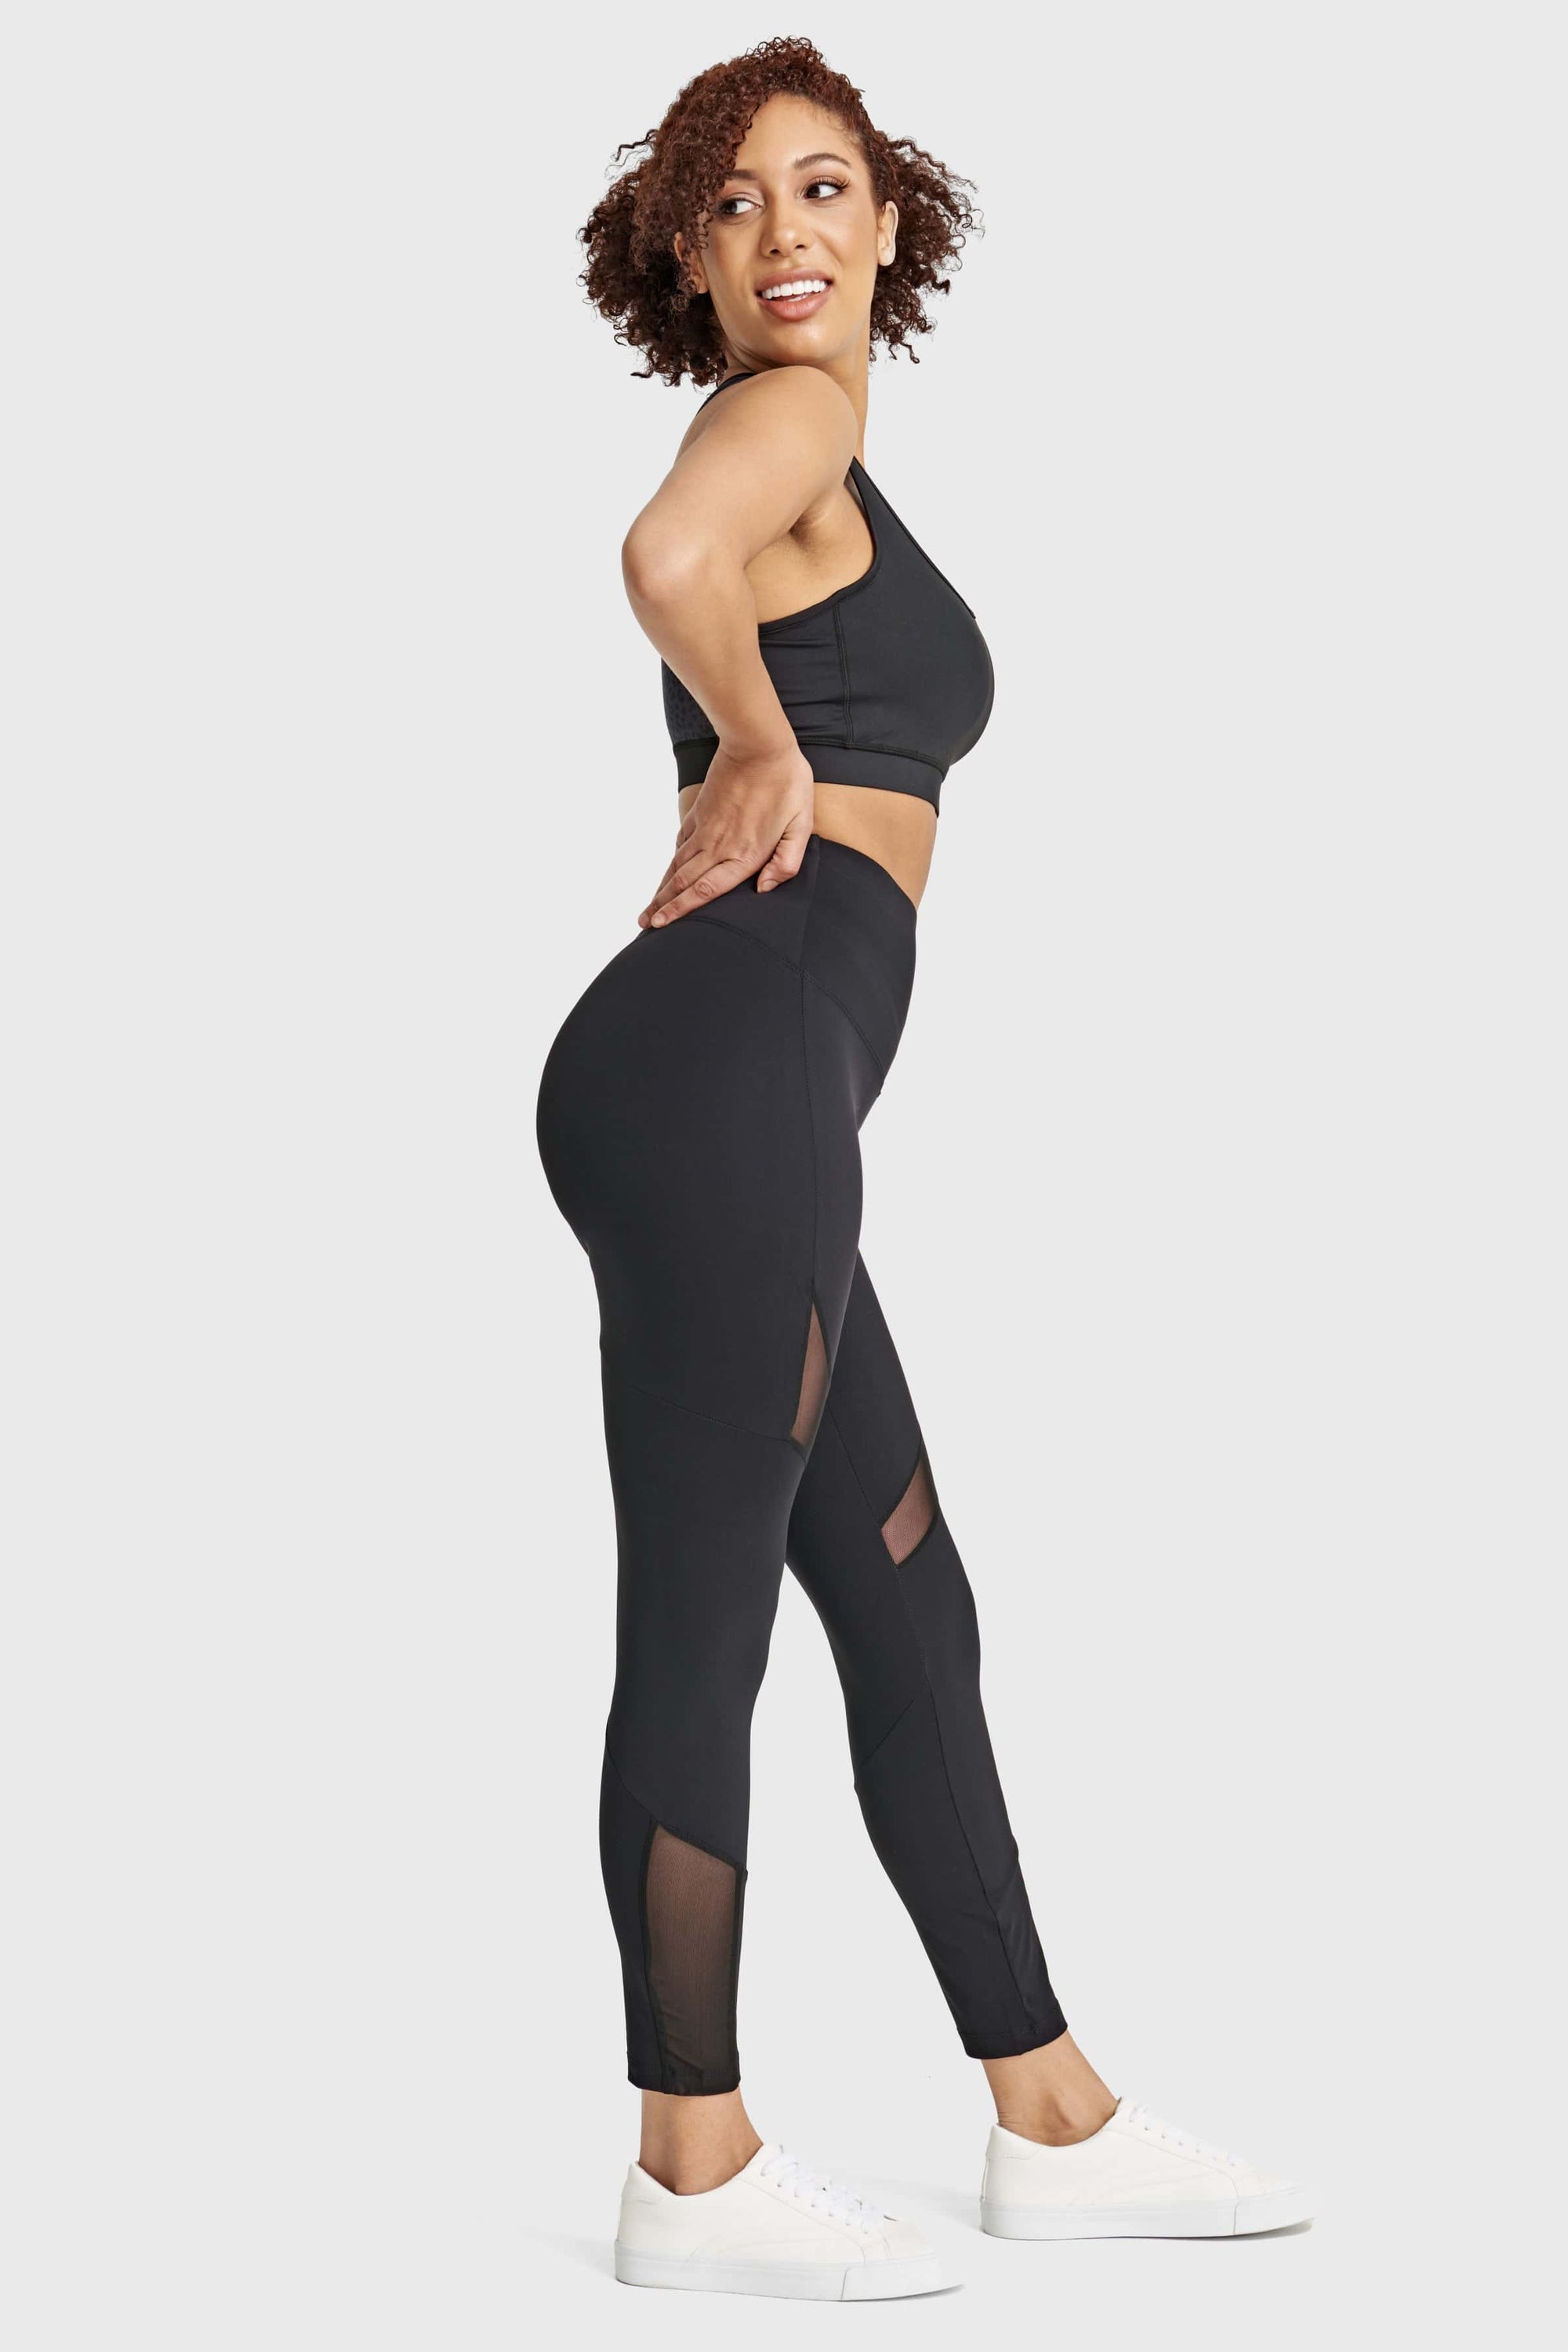 Superfit Diwo Pro With Mesh Detailing - High Waisted - Petite Length - Black 6